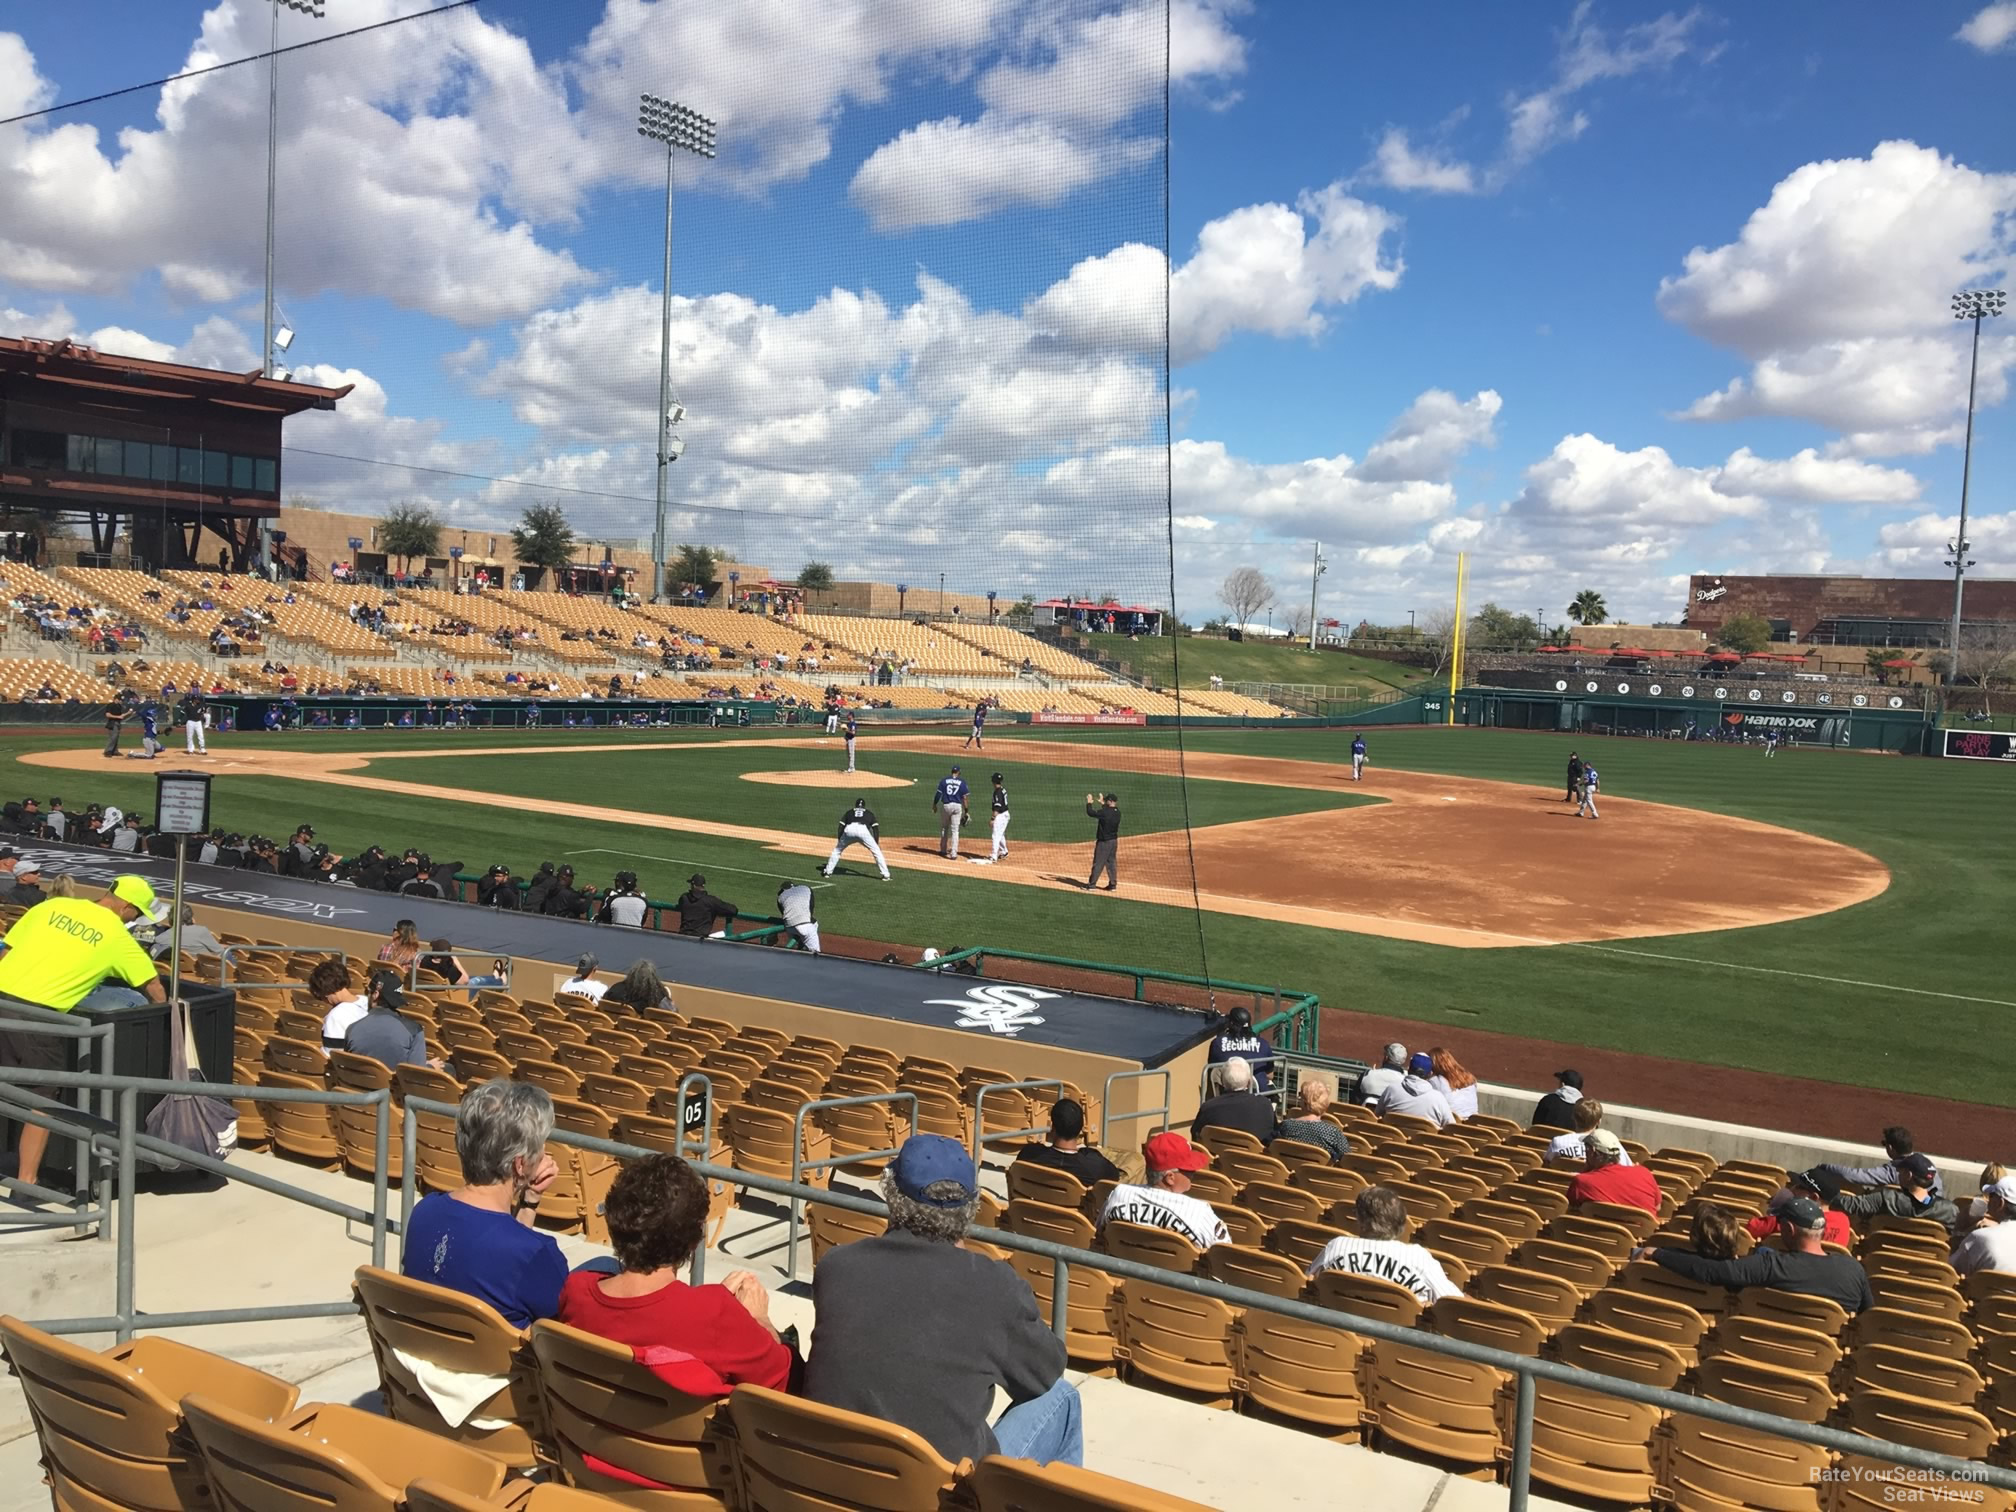 section 105, row 5 seat view  - camelback ranch